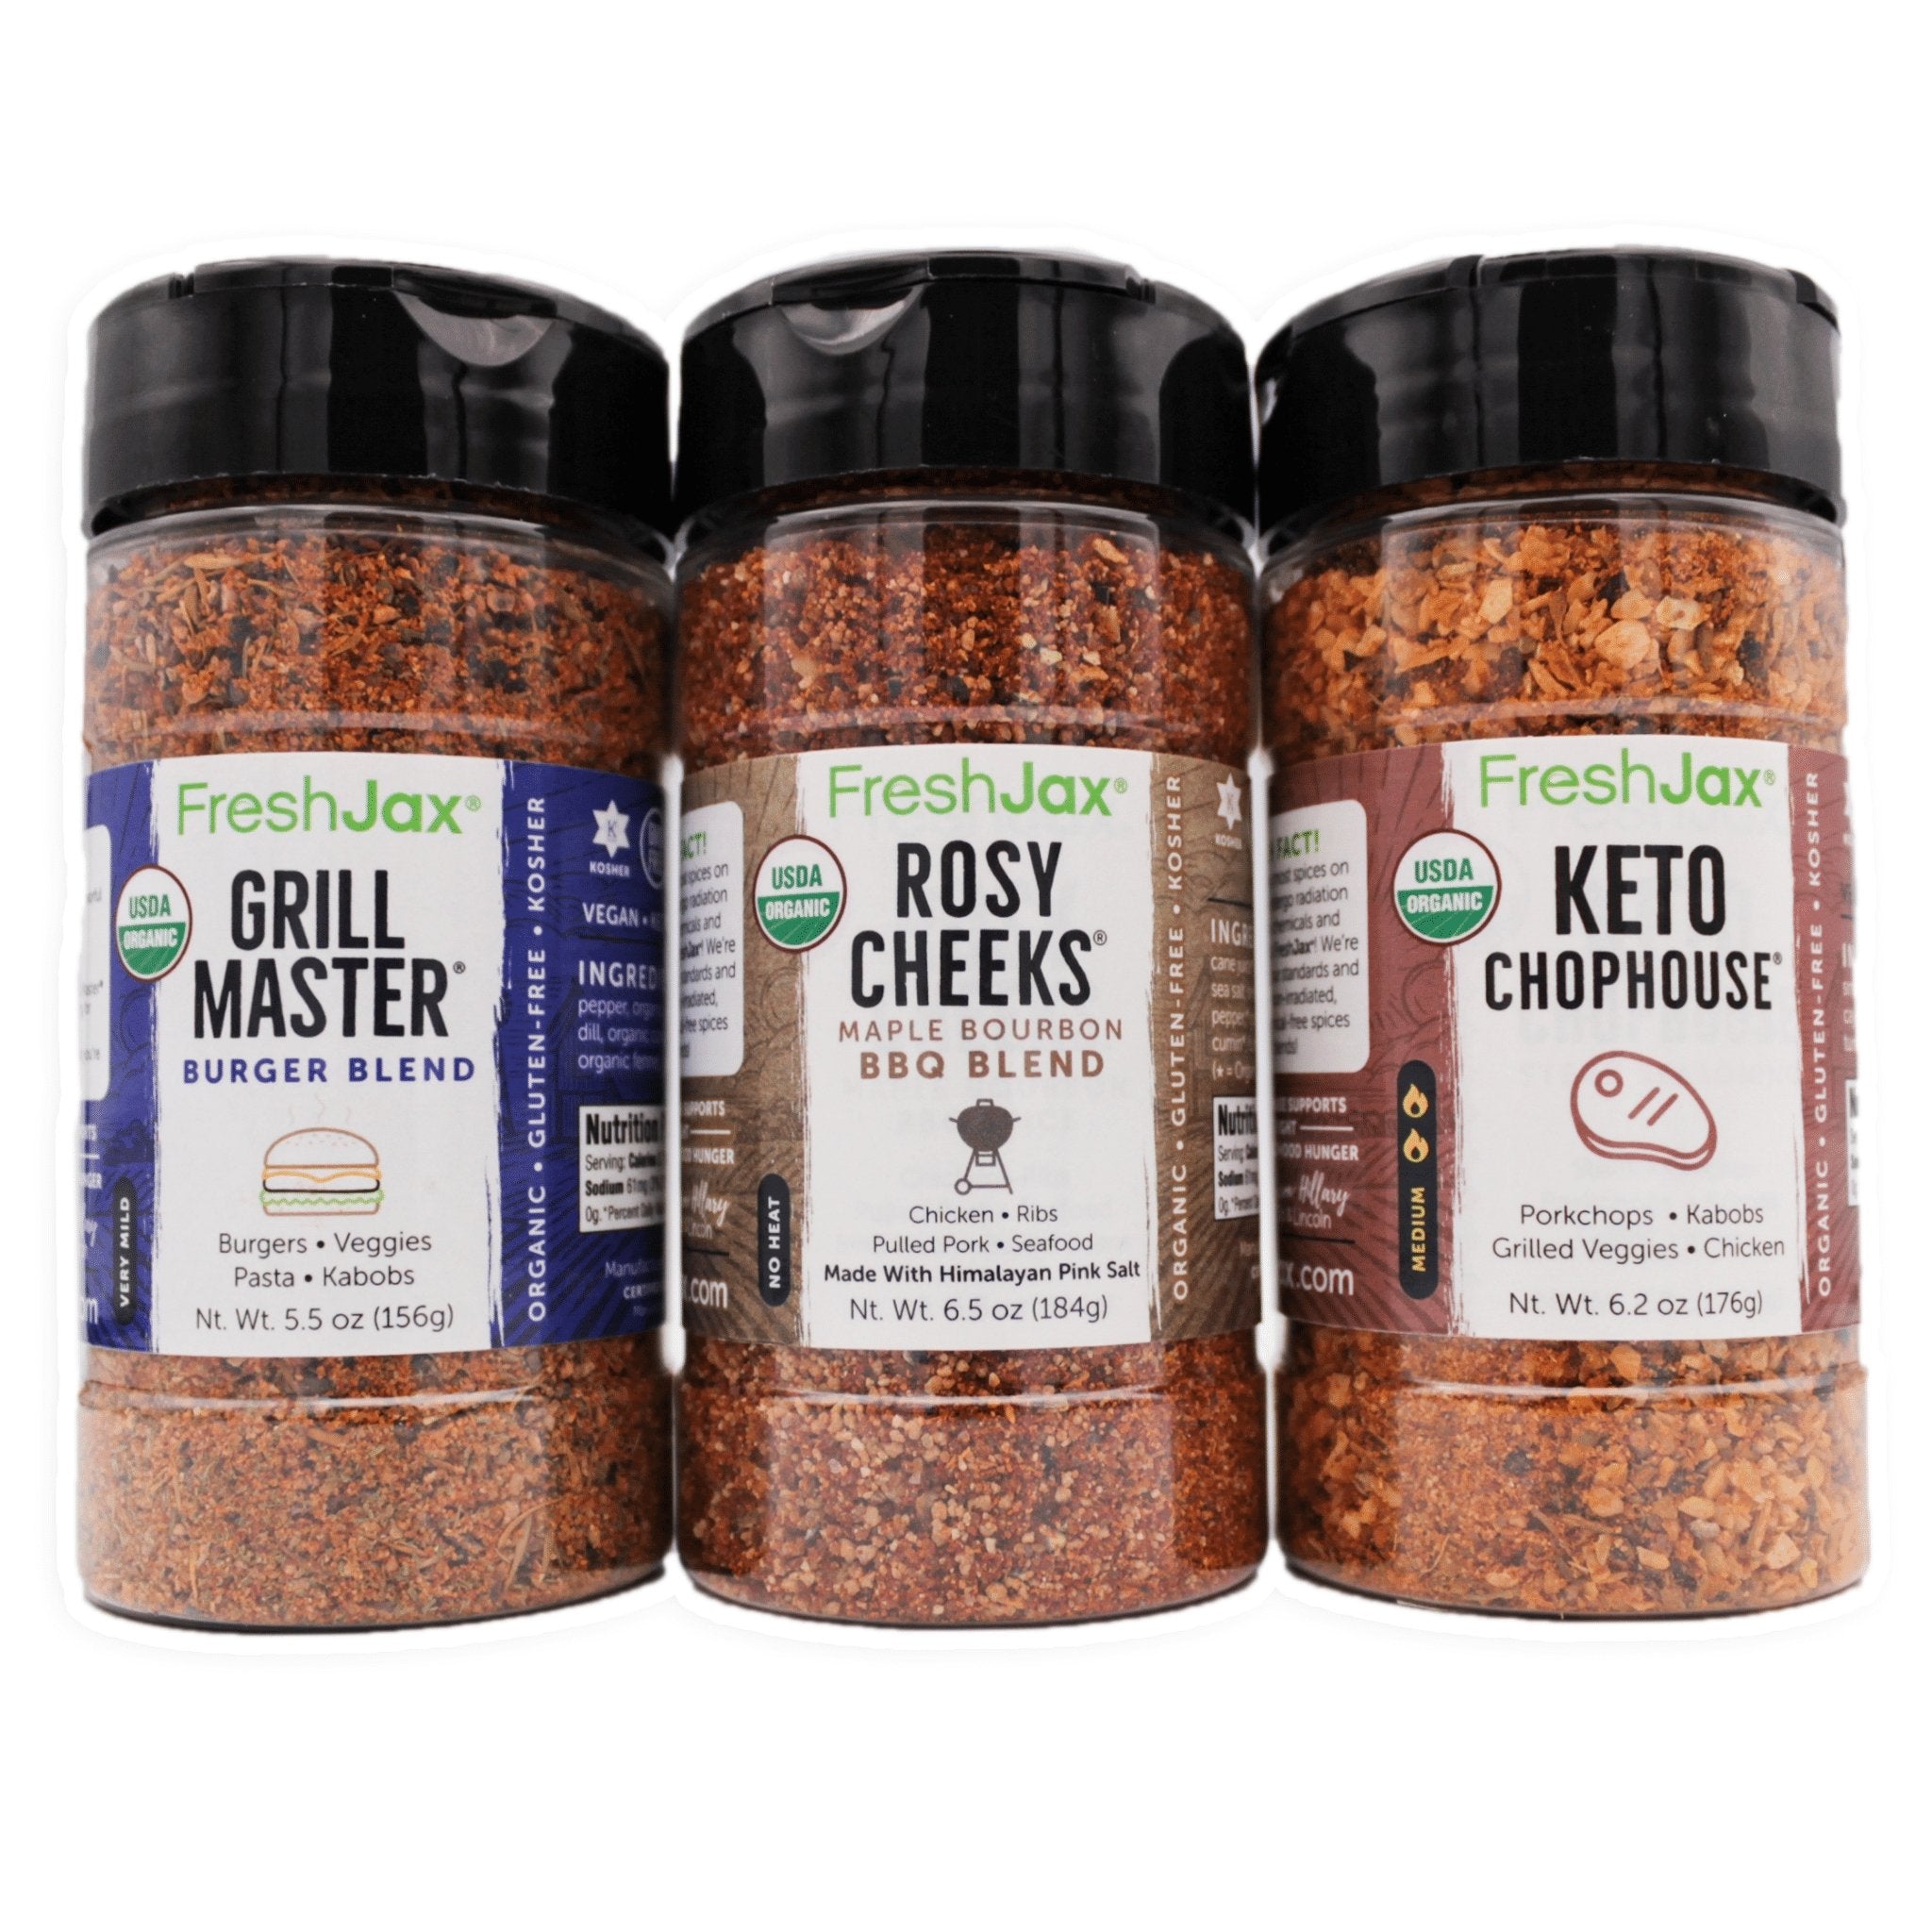  Grilling Seasoning & Rub 4-Pack Gift Set, USA Small Business, Premium BBQ Spices, Grill Gift for Men, Gift for Dad, Barbecue,  Grilling, and Smoking